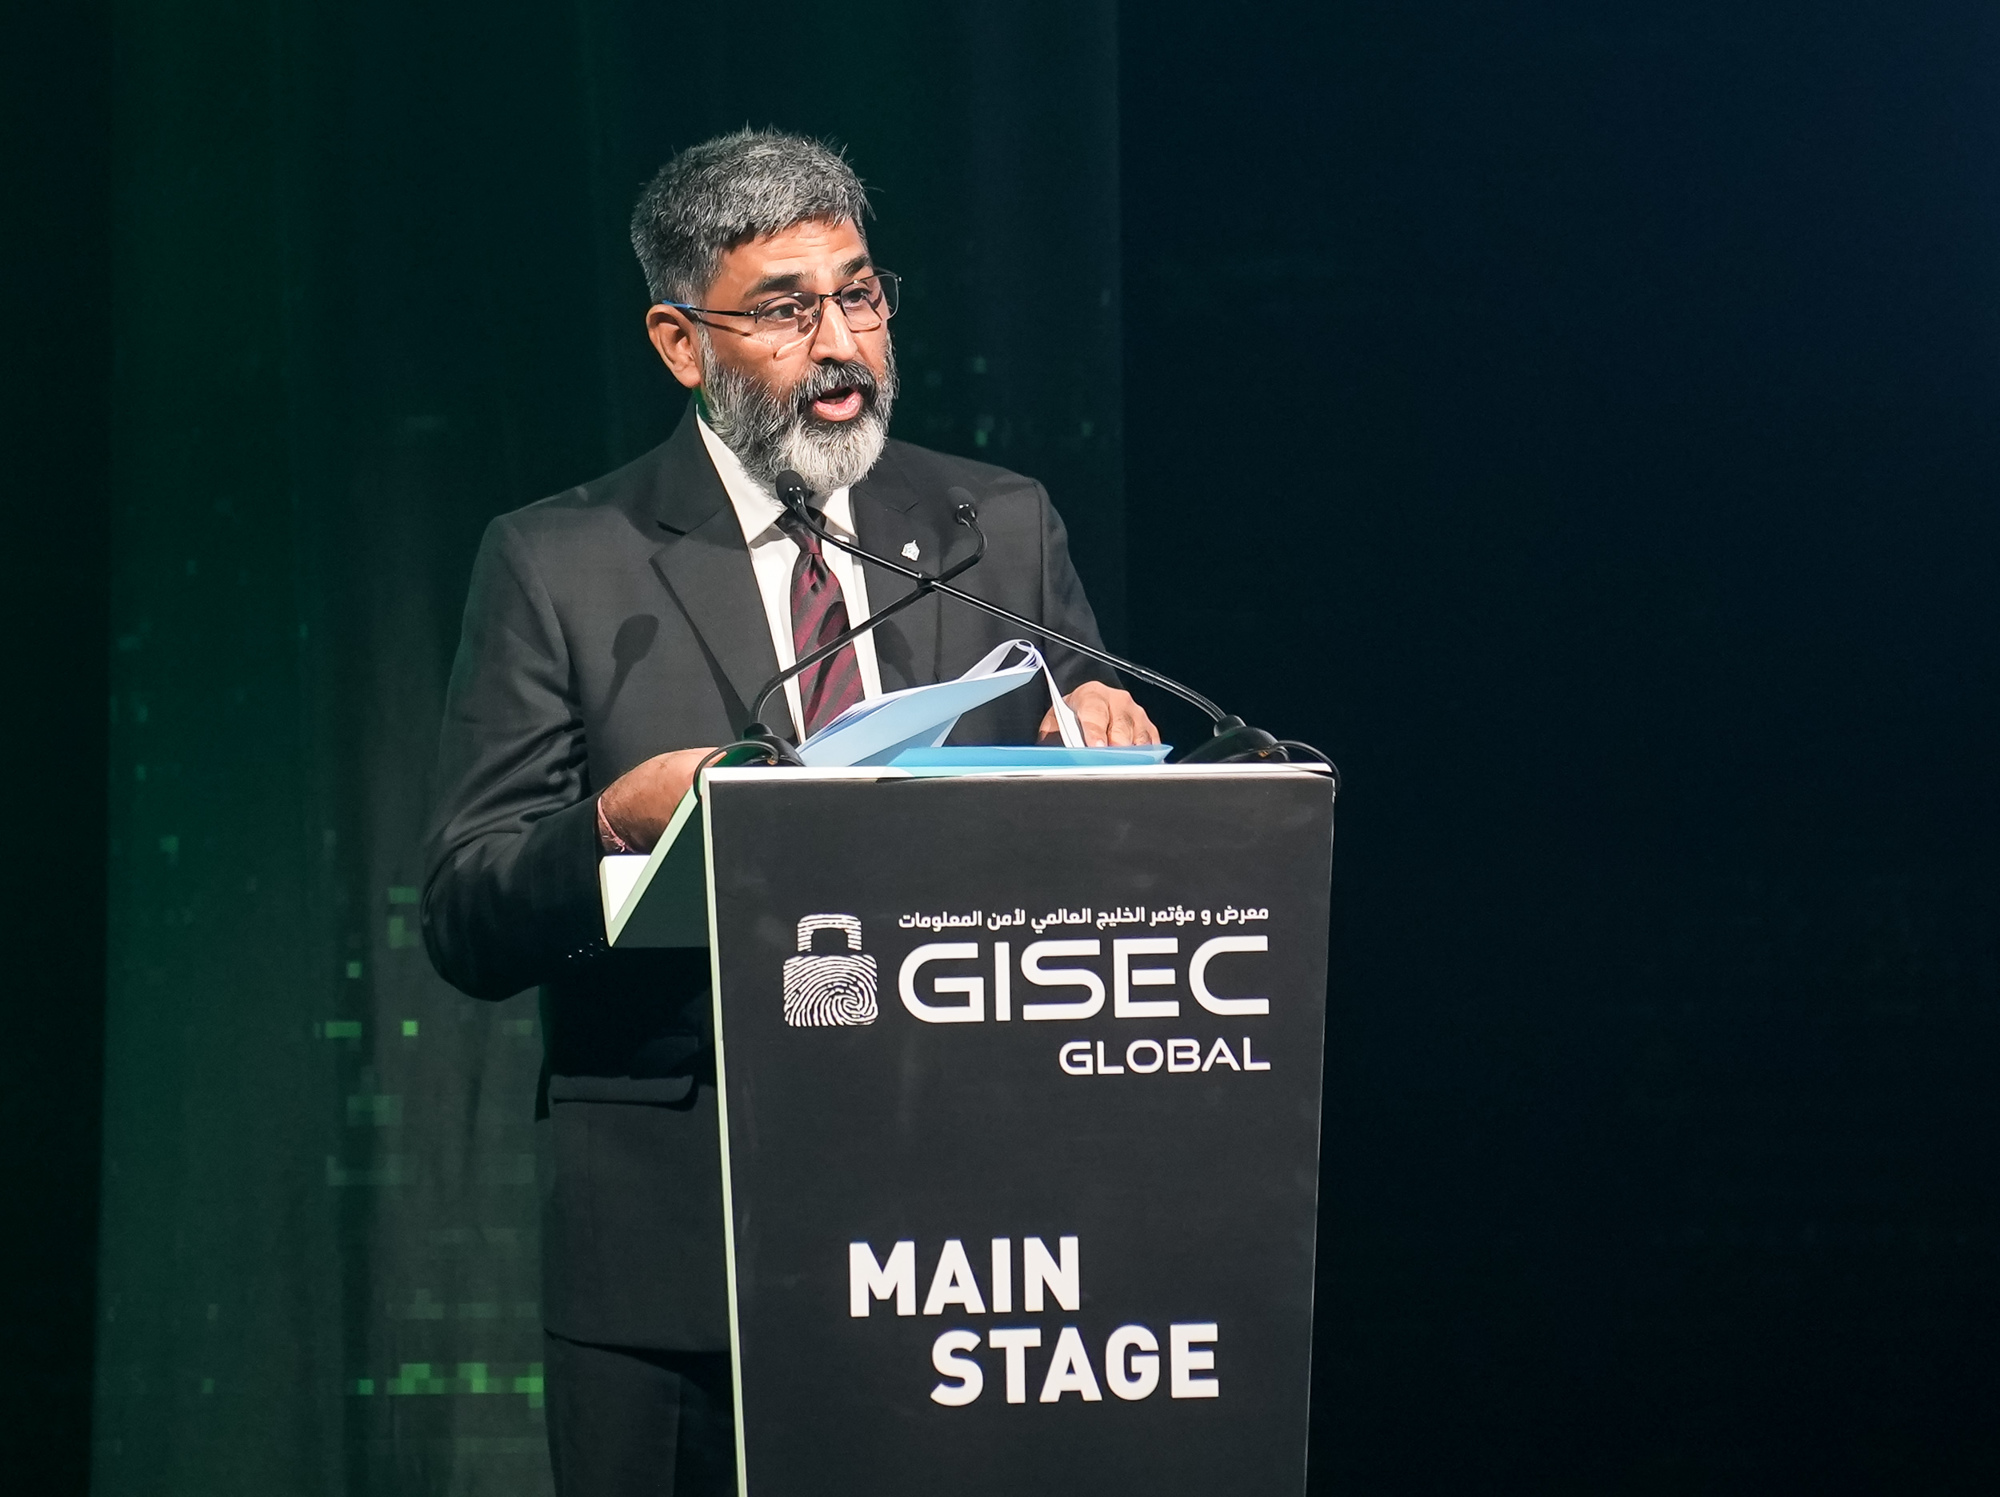 Dr. Madan Oberoi, Executive Director for Technology and Innovation, Interpol, Singapore at GISEC Global 2023